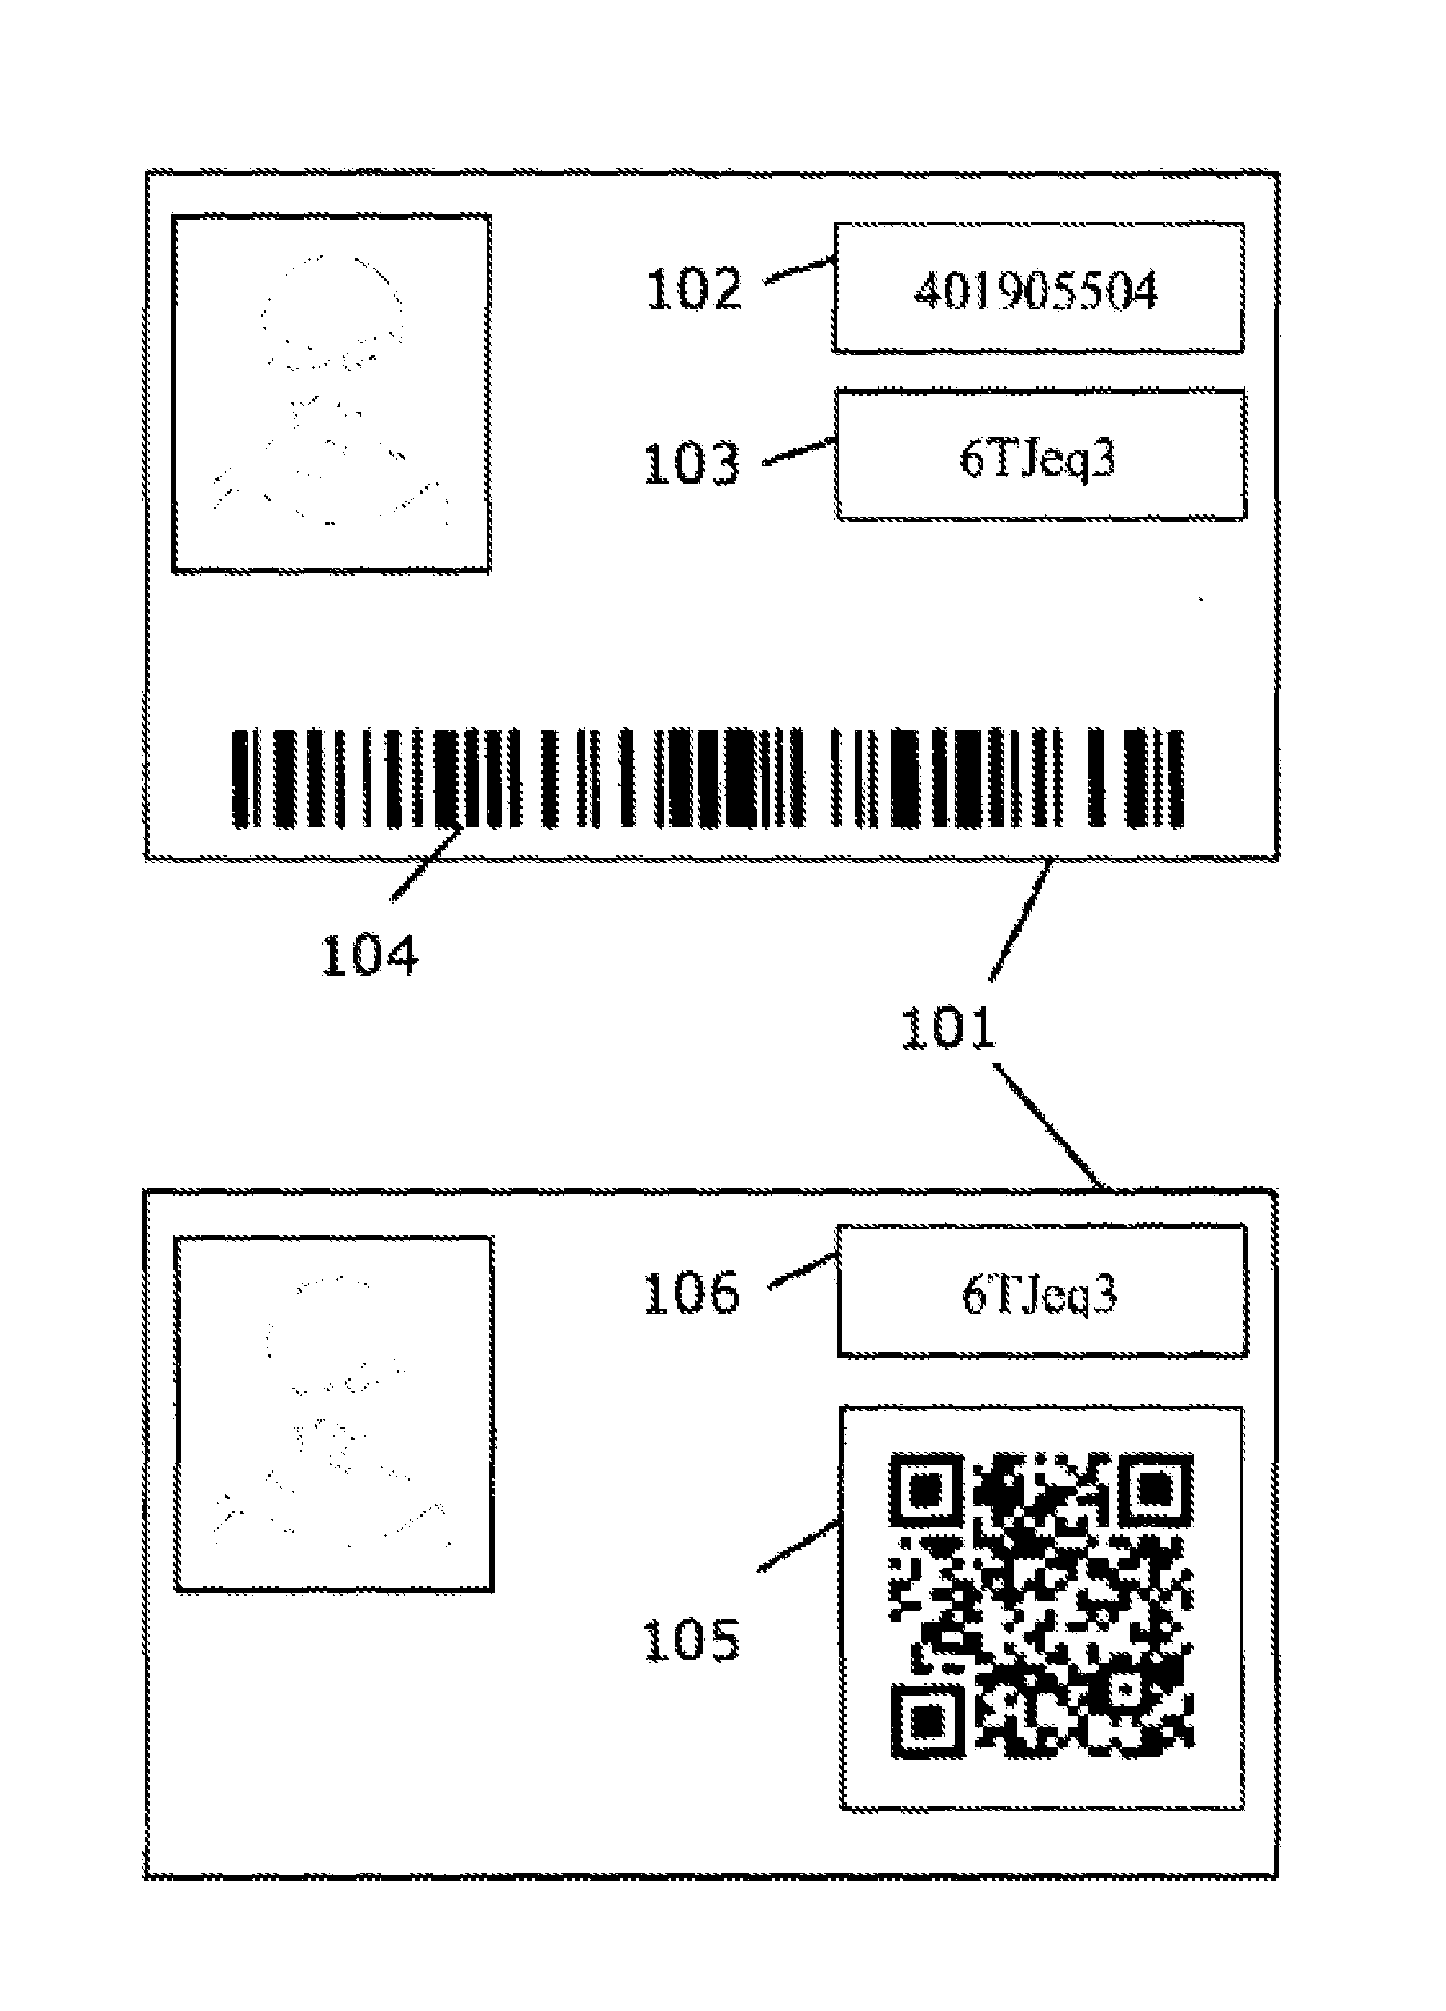 System and Method for Encoding and Controlled Authentication